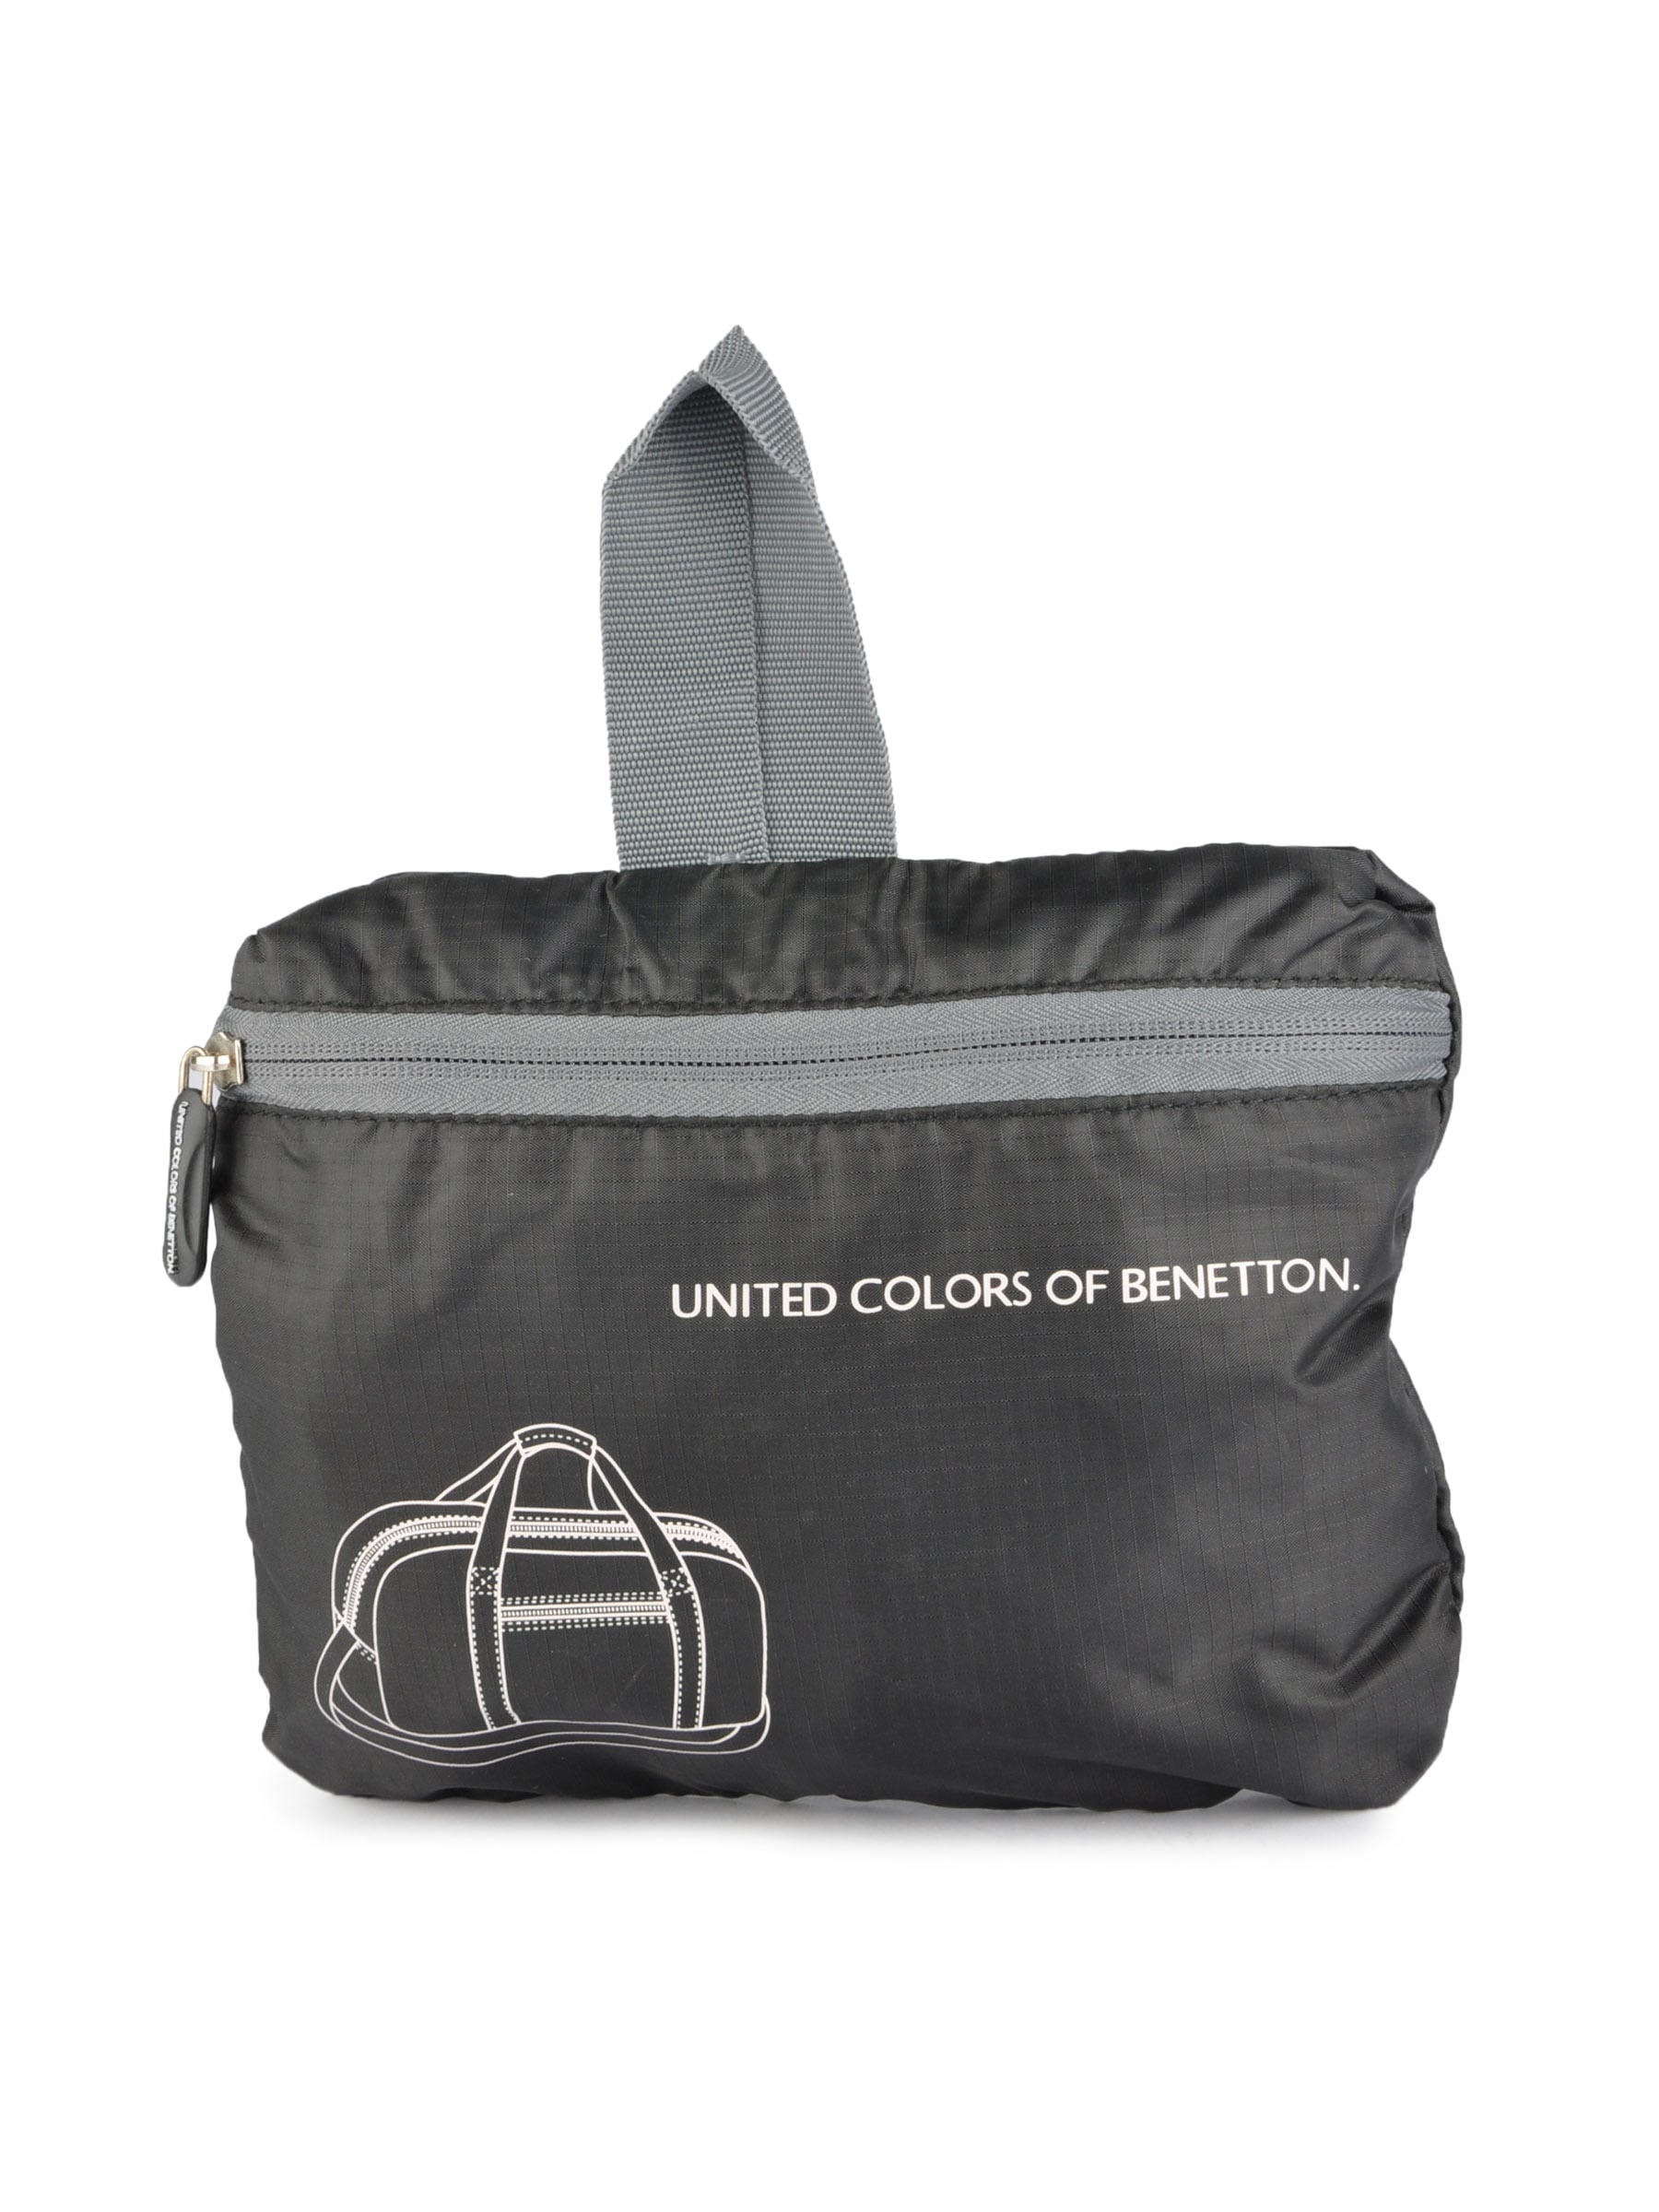 United Colors of Benetton Women Solid Black Bags